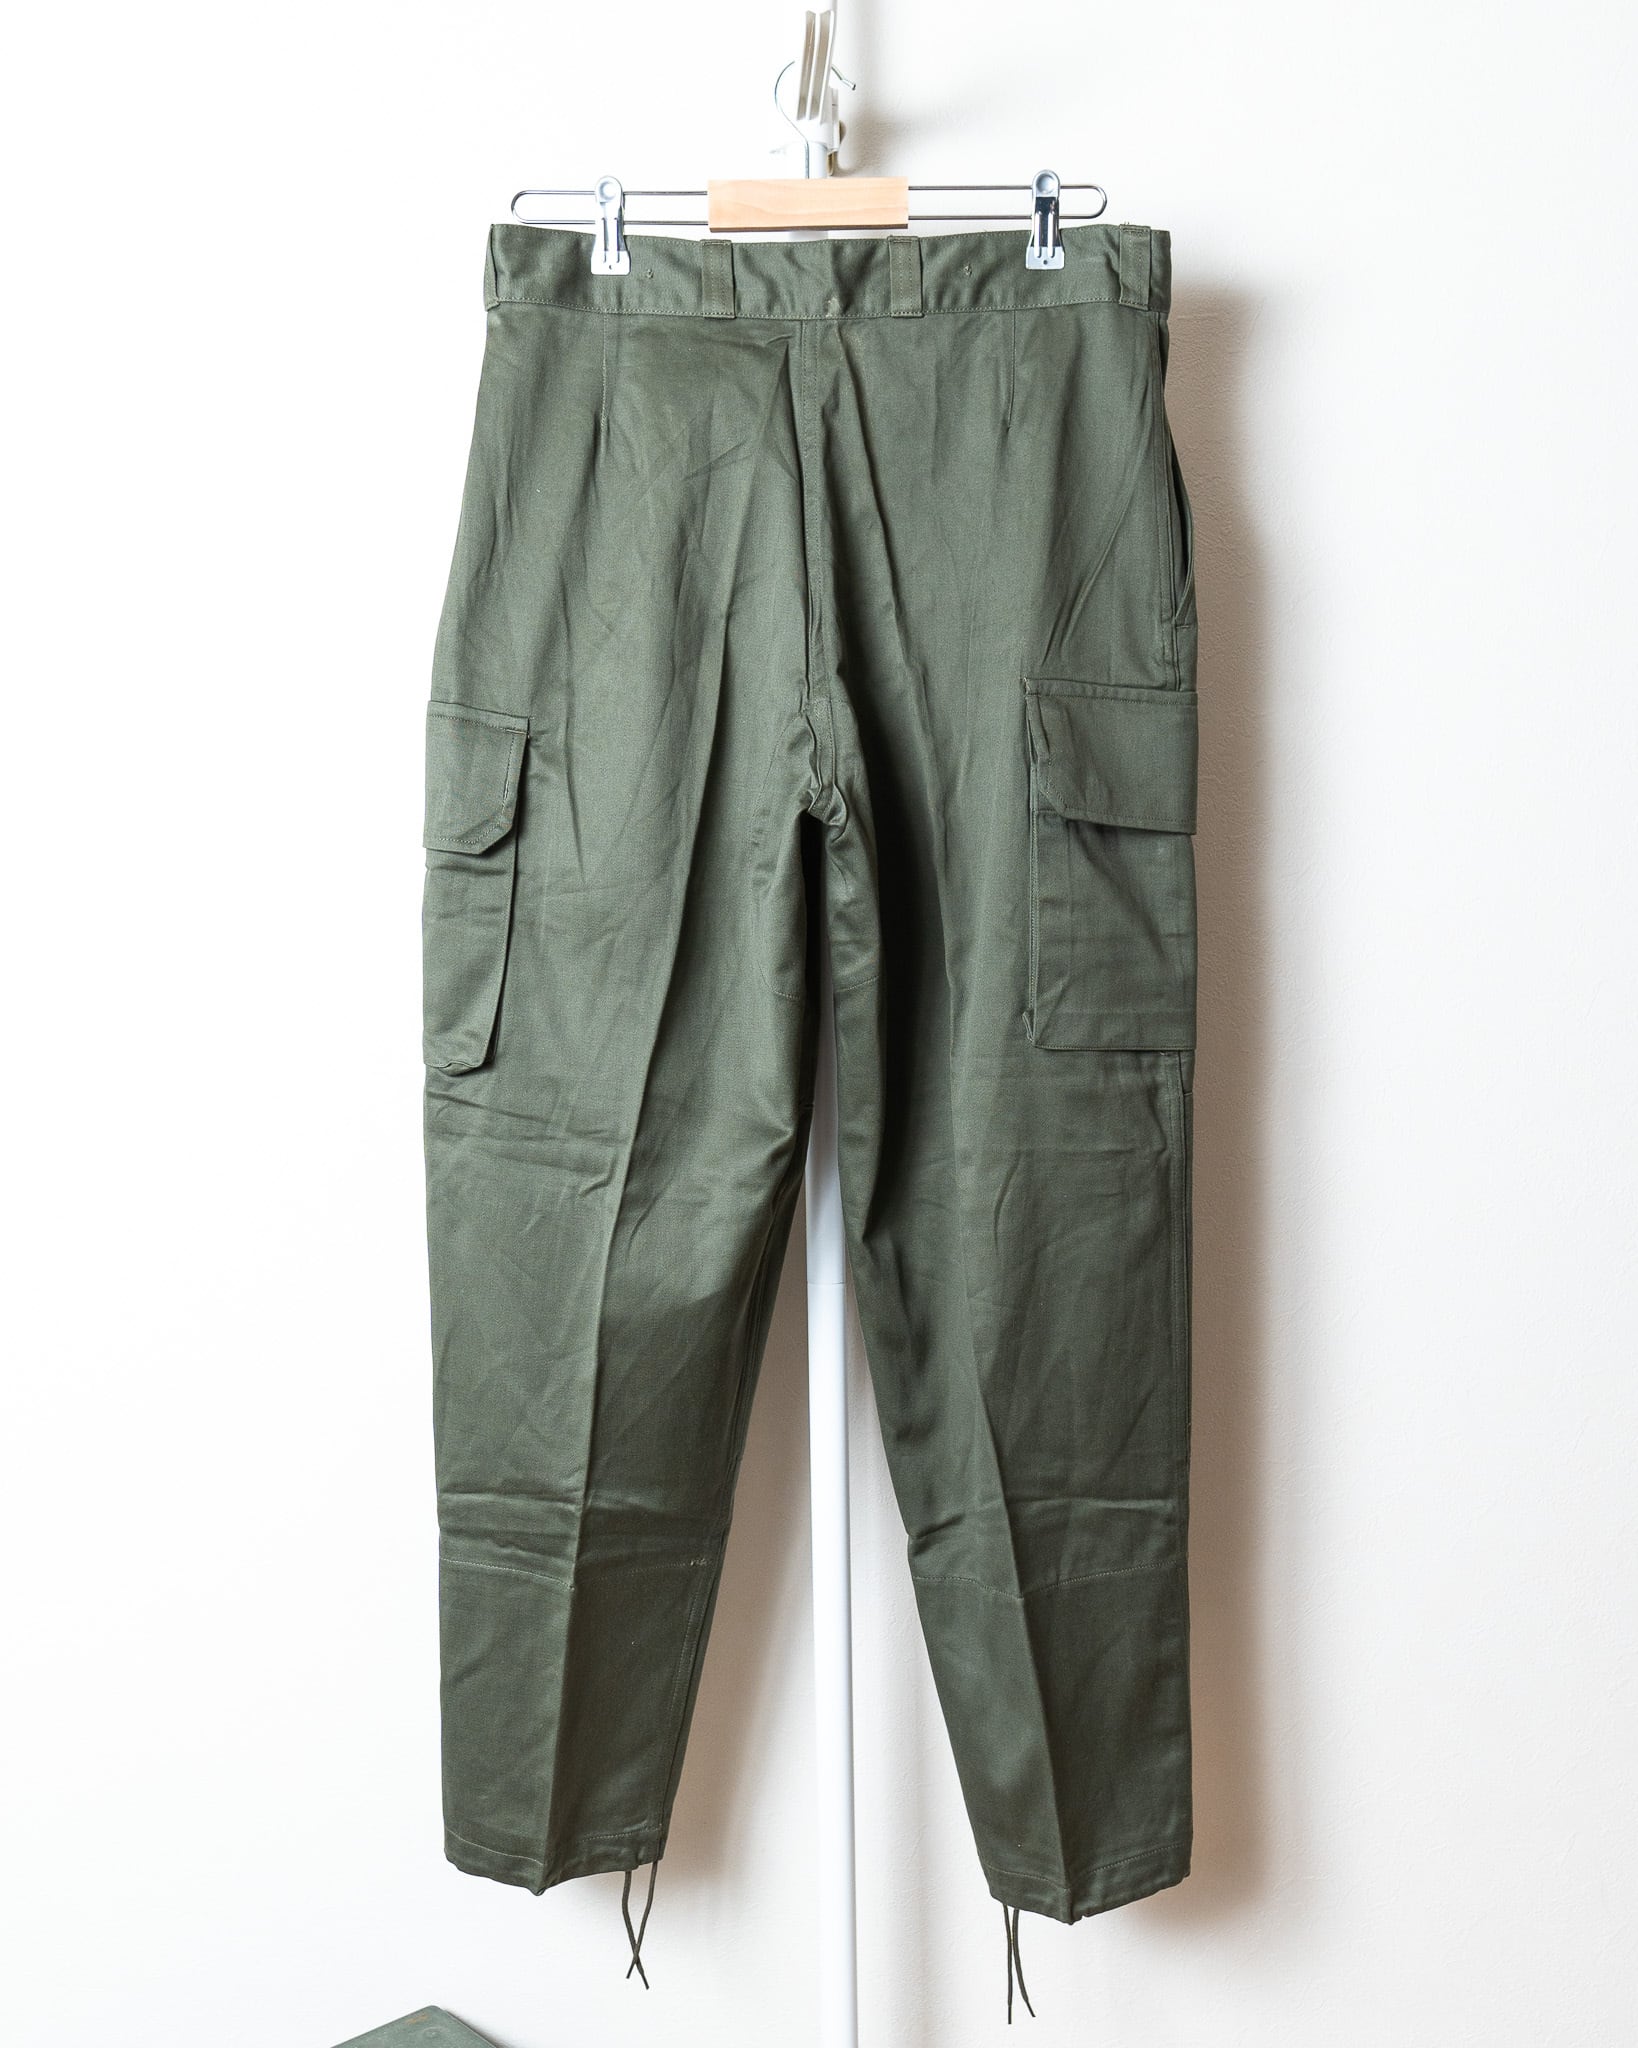 DEADSTOCKFrench Army M Field Trousers デッドストック